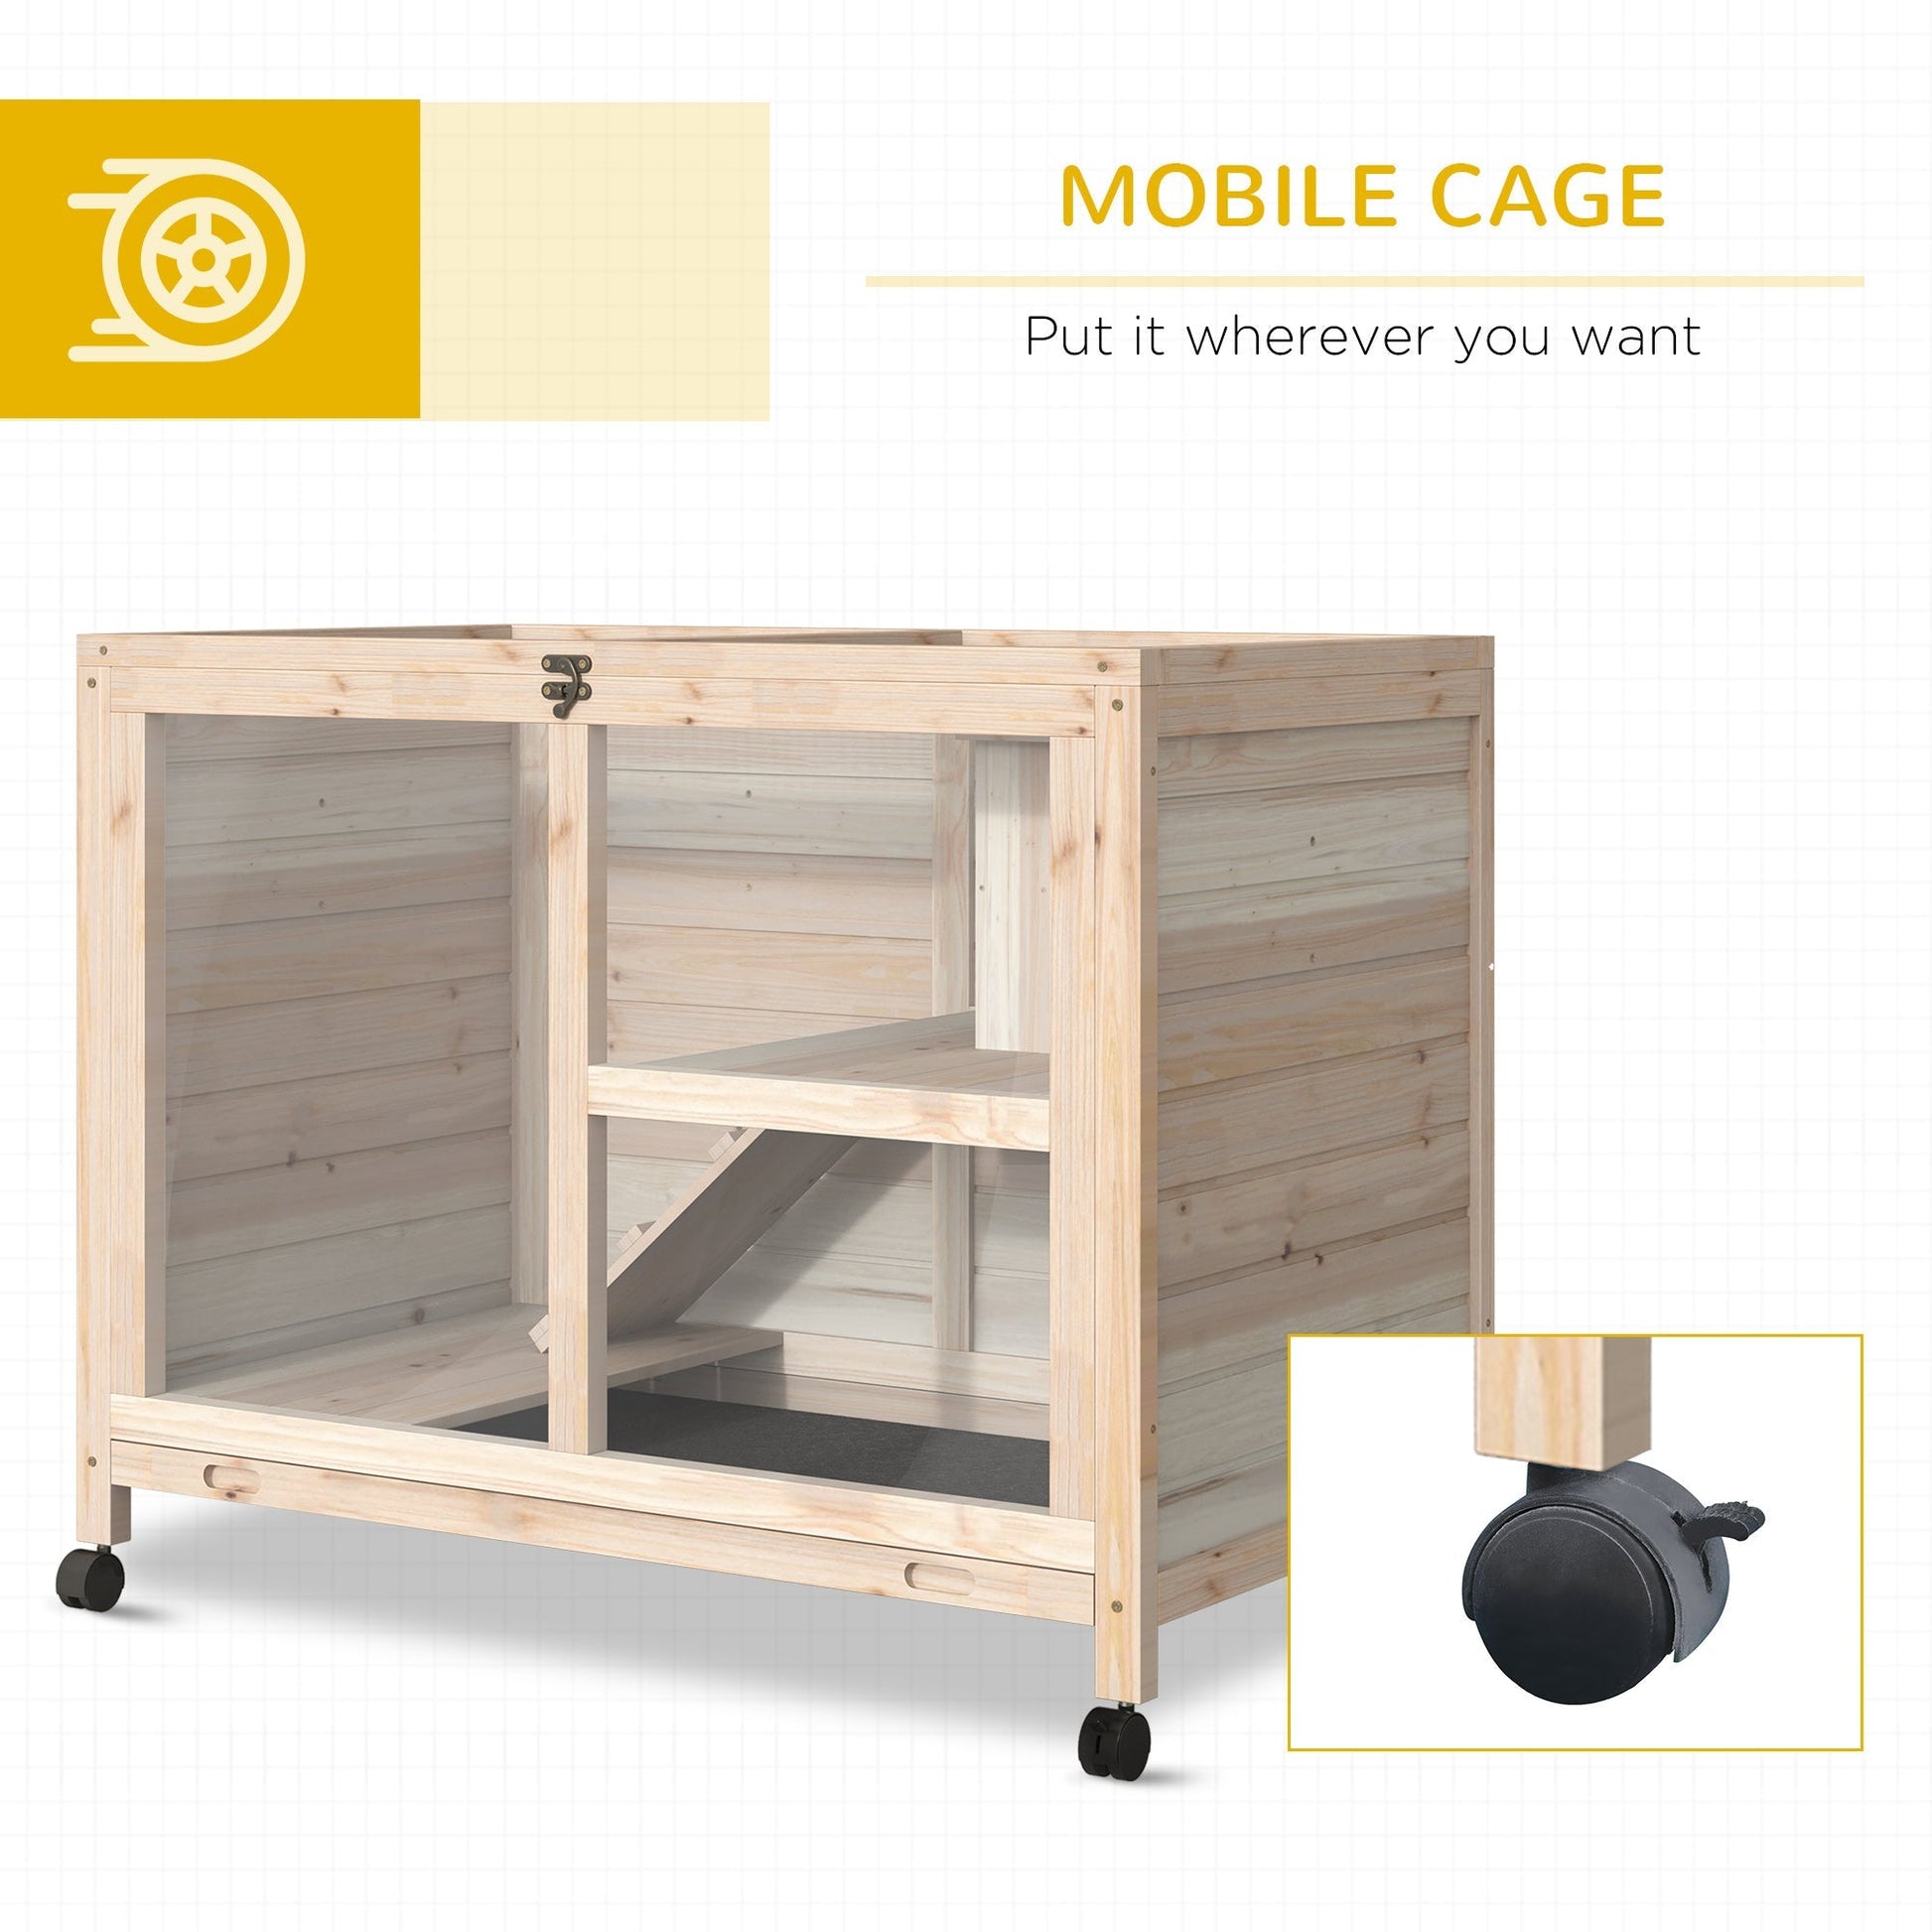 Indoor Rabbit Hutch with Wheels, Bunny Cage Guinea Pig House W/ Top Access, Ramp, Pull Out Tray, Natural Wood at Gallery Canada